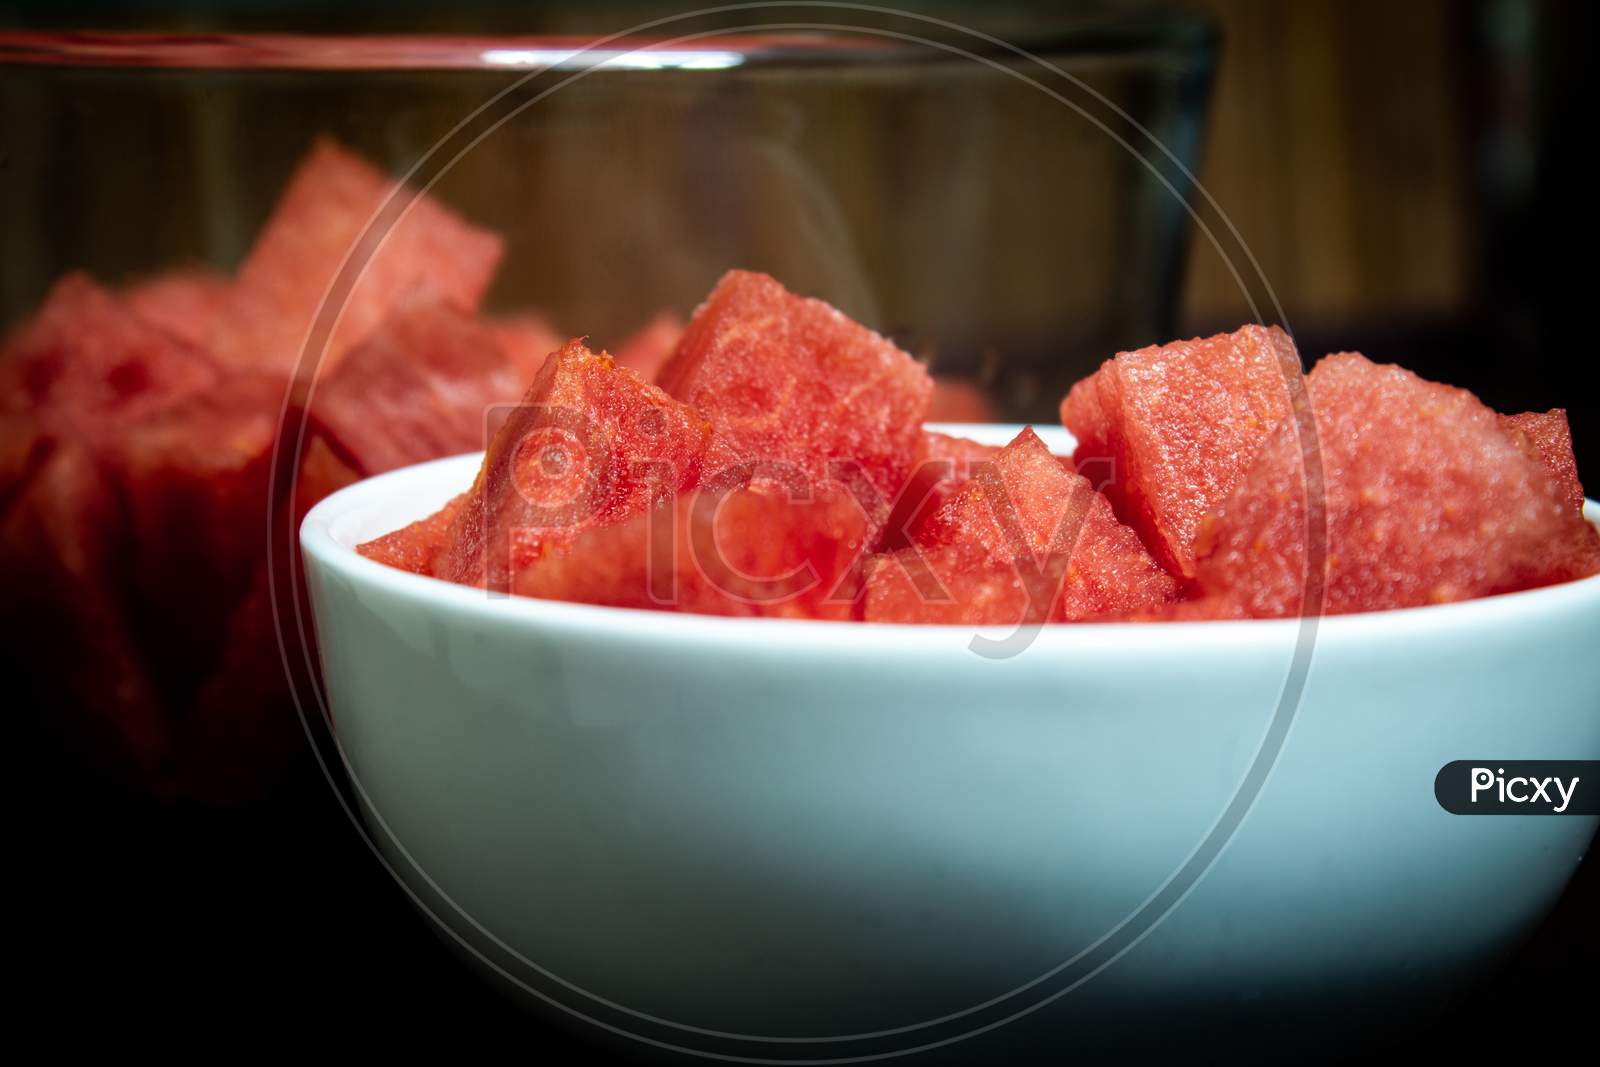 View Of Watermelon Fruit Sliced Into Pieces. Use For Healthy Snack Concept.